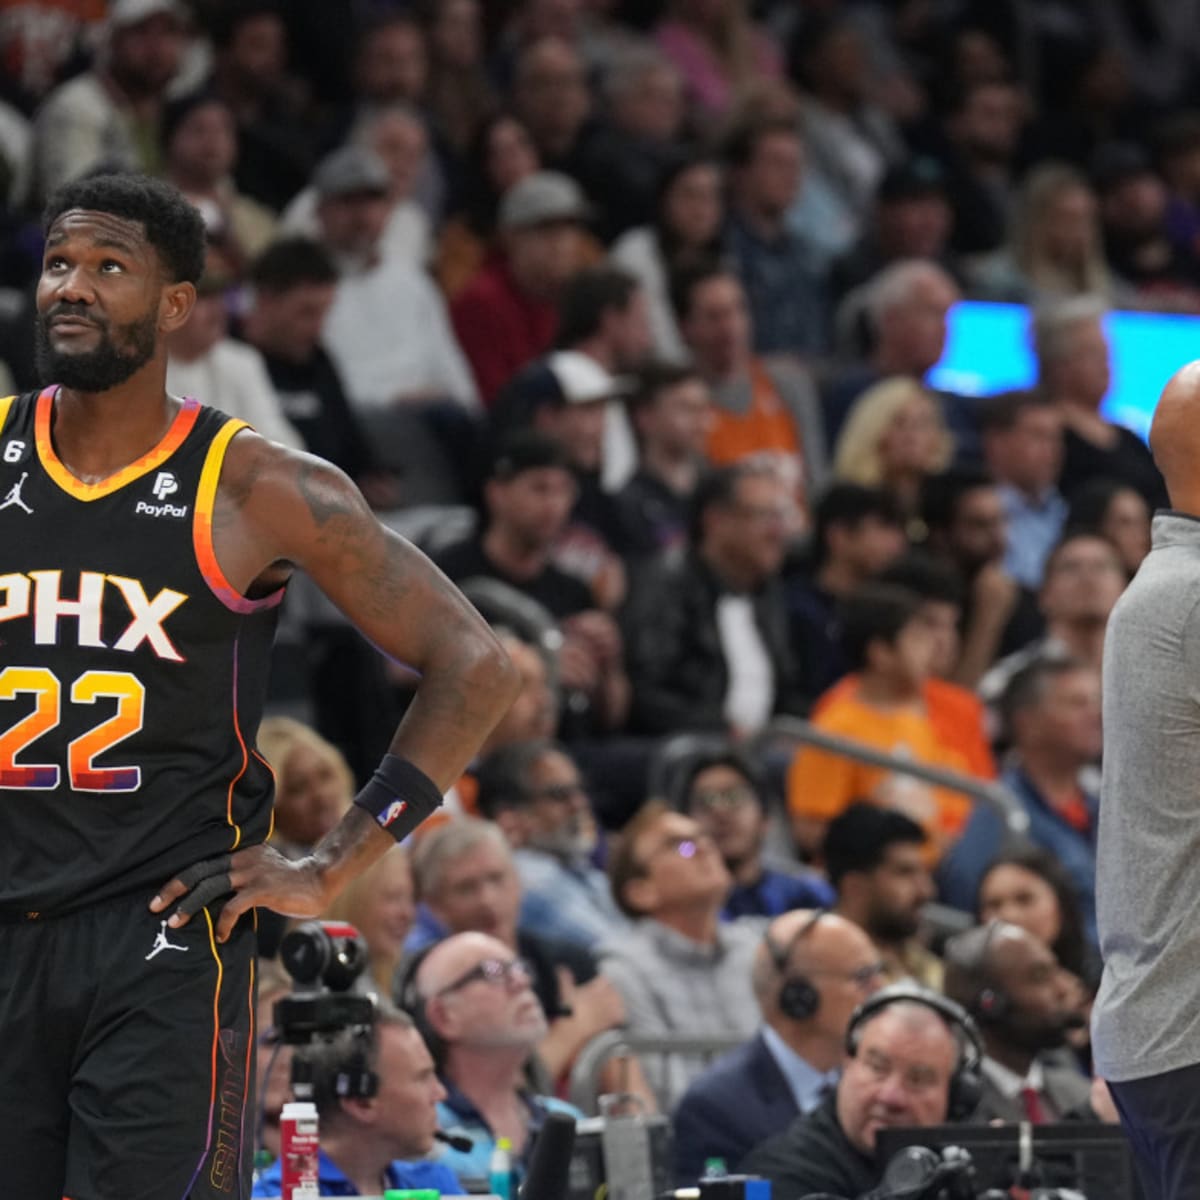 Is Deandre Ayton time with Phoenix Suns over? - PHNX